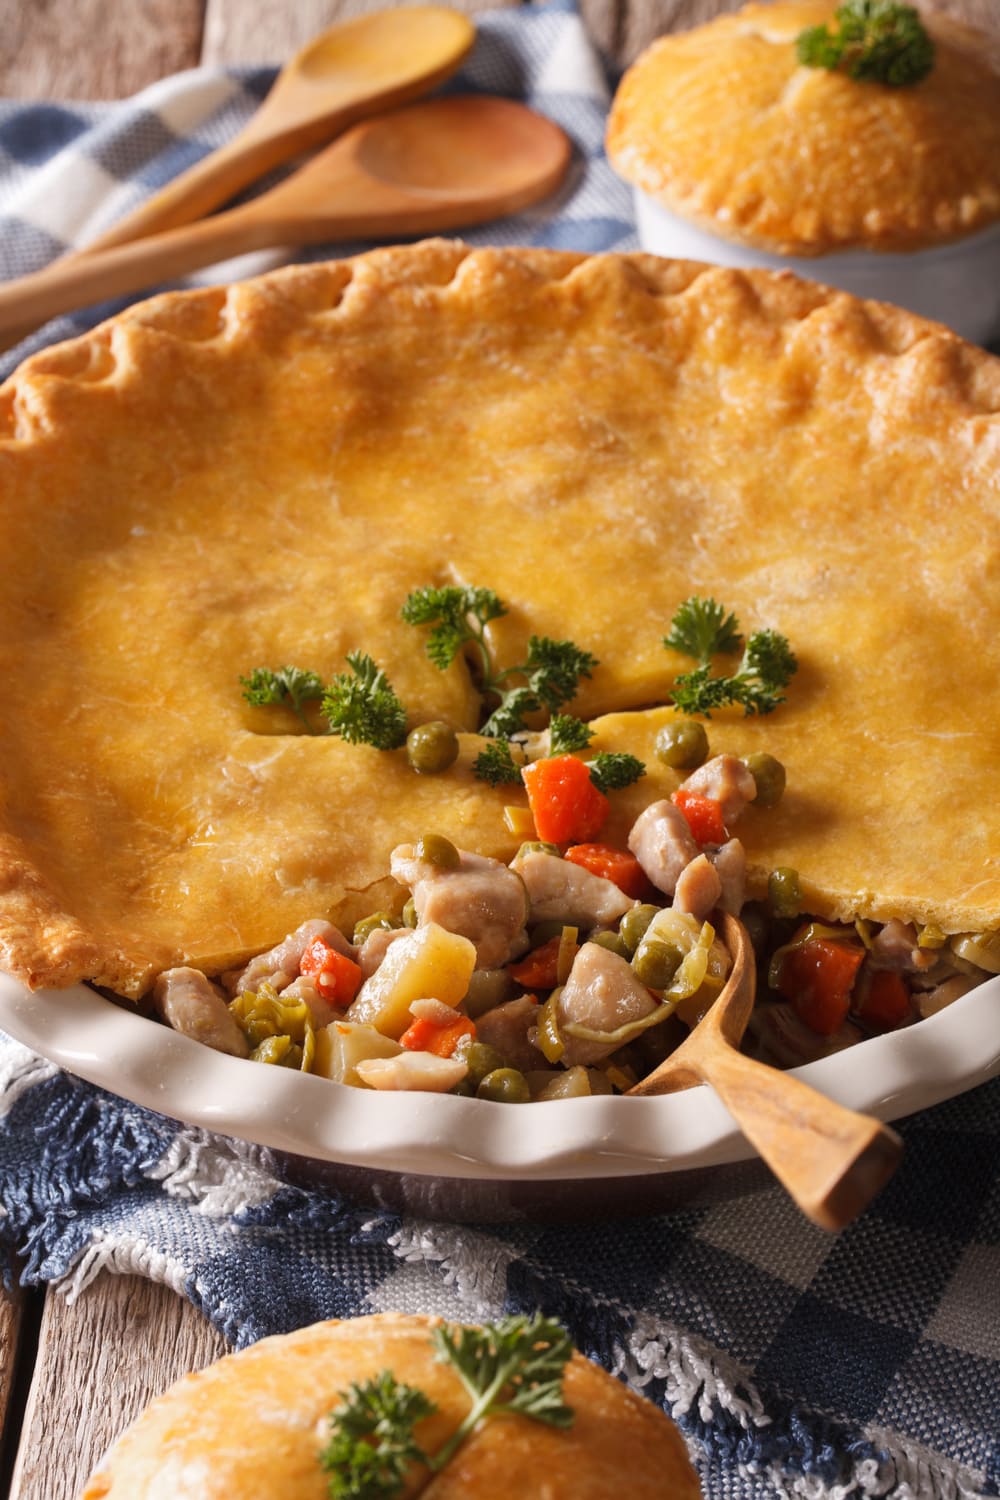 A savory pie filled with chicken, vegetables, and aromatic herbs with wooden spoon dipped on it.